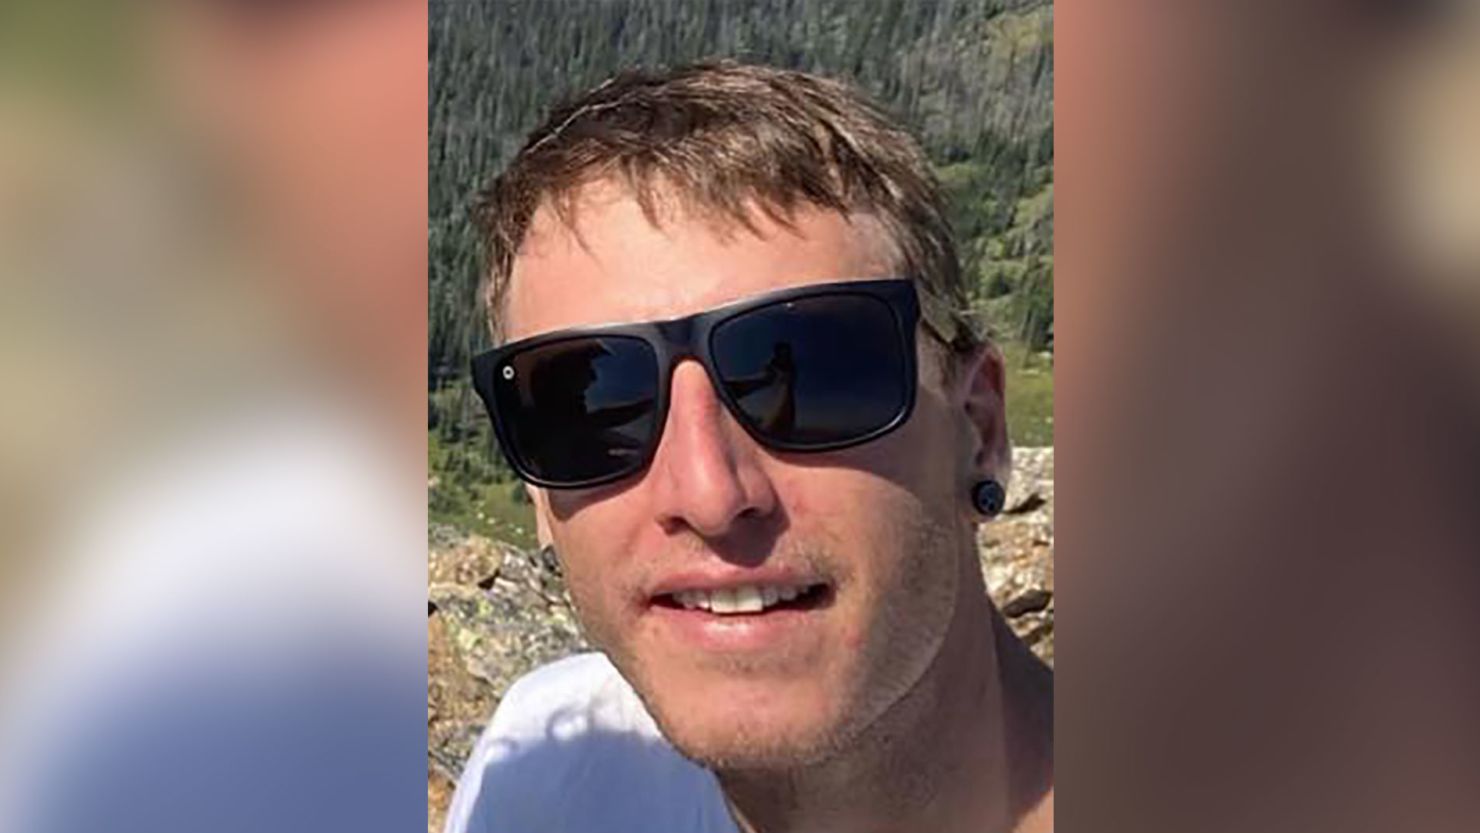 Adam Fuselier, from Castle Pines, Colorado, went missing last week while hiking in Montana.